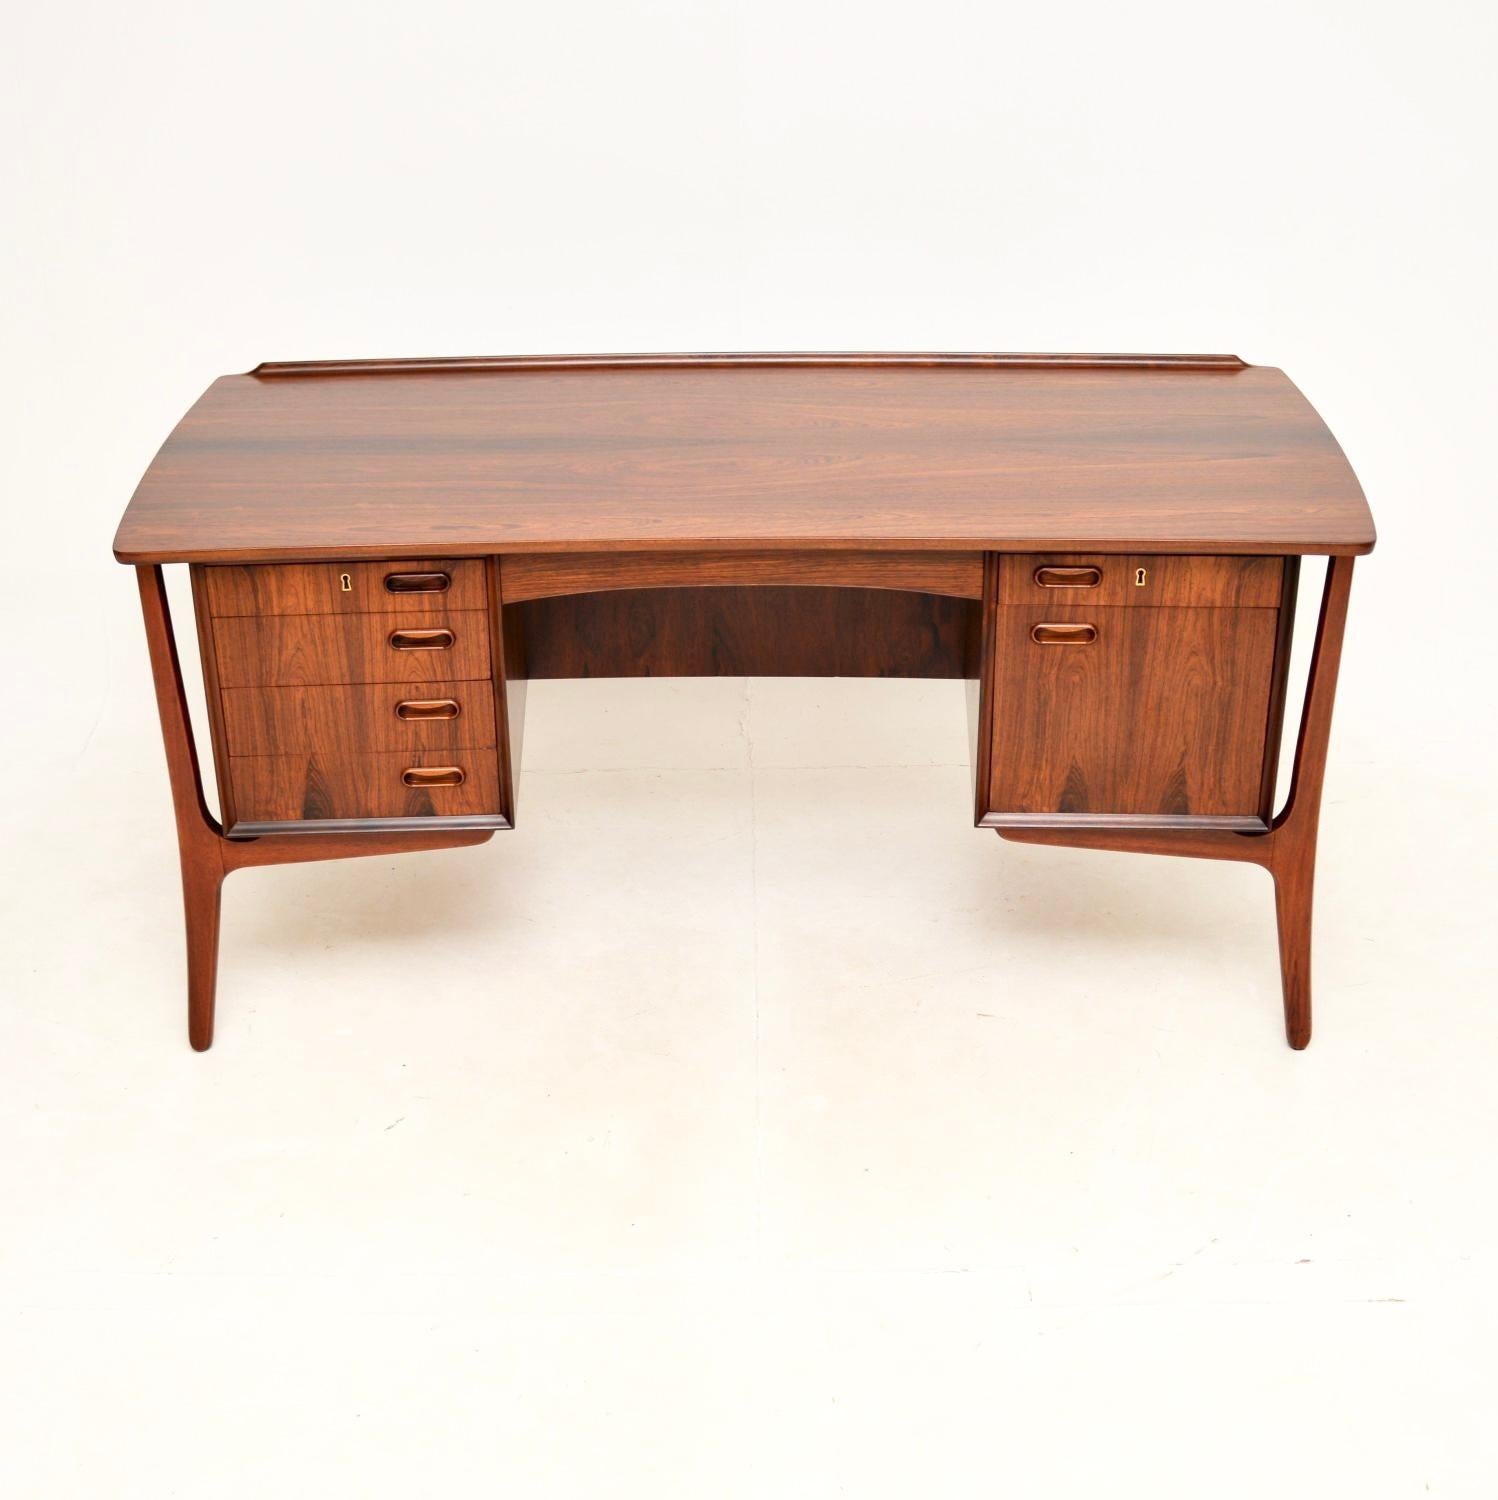 A stunning vintage Danish desk by Svend Aage Madsen for HP Hansen. This was recently imported from Denmark, it dates from the 1960’s.

It is of superb quality and has an incredibly stylish design. The grain patterns and colour tones are absolutely